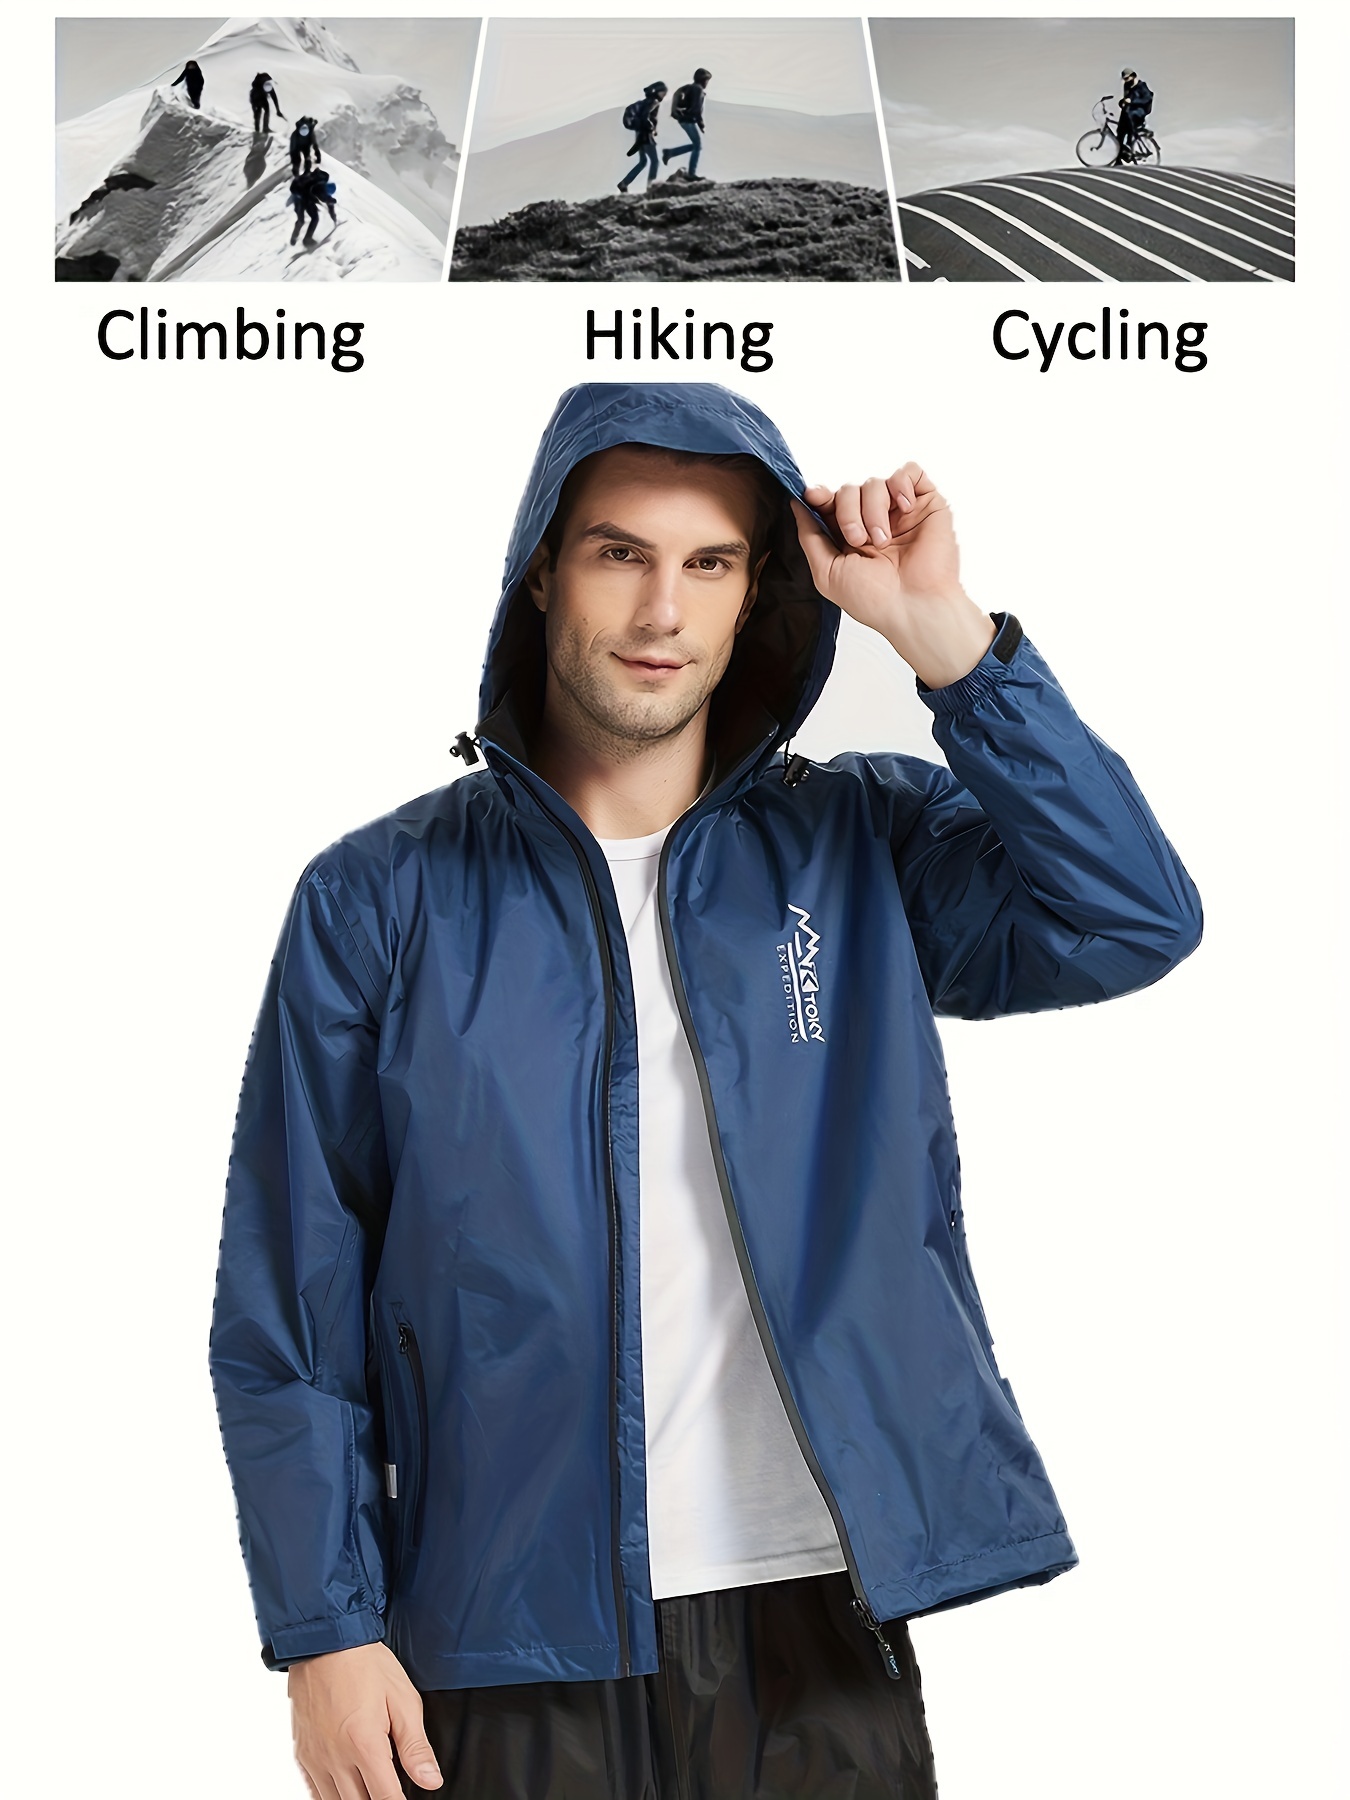 Men's Outdoor Jackets for all Seasons